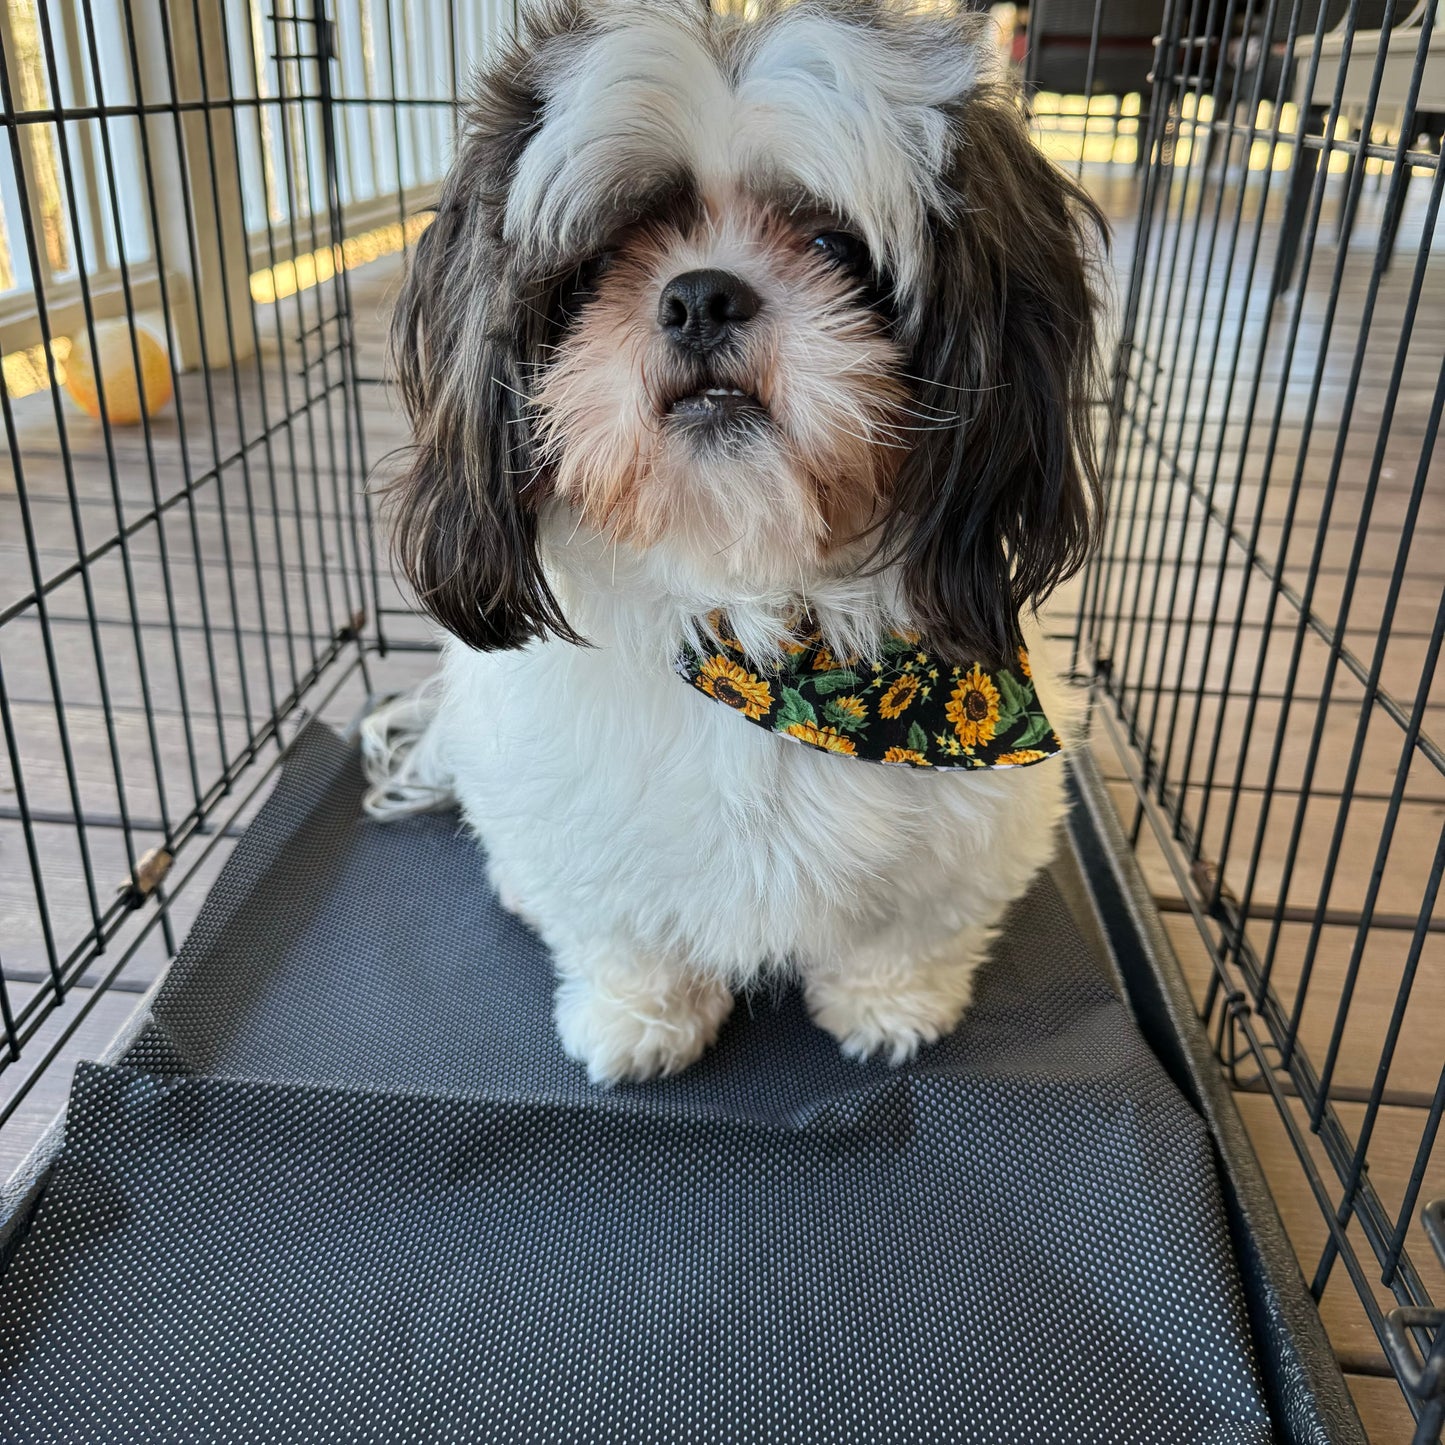 Cute black and white dog in a crate with crate mat.